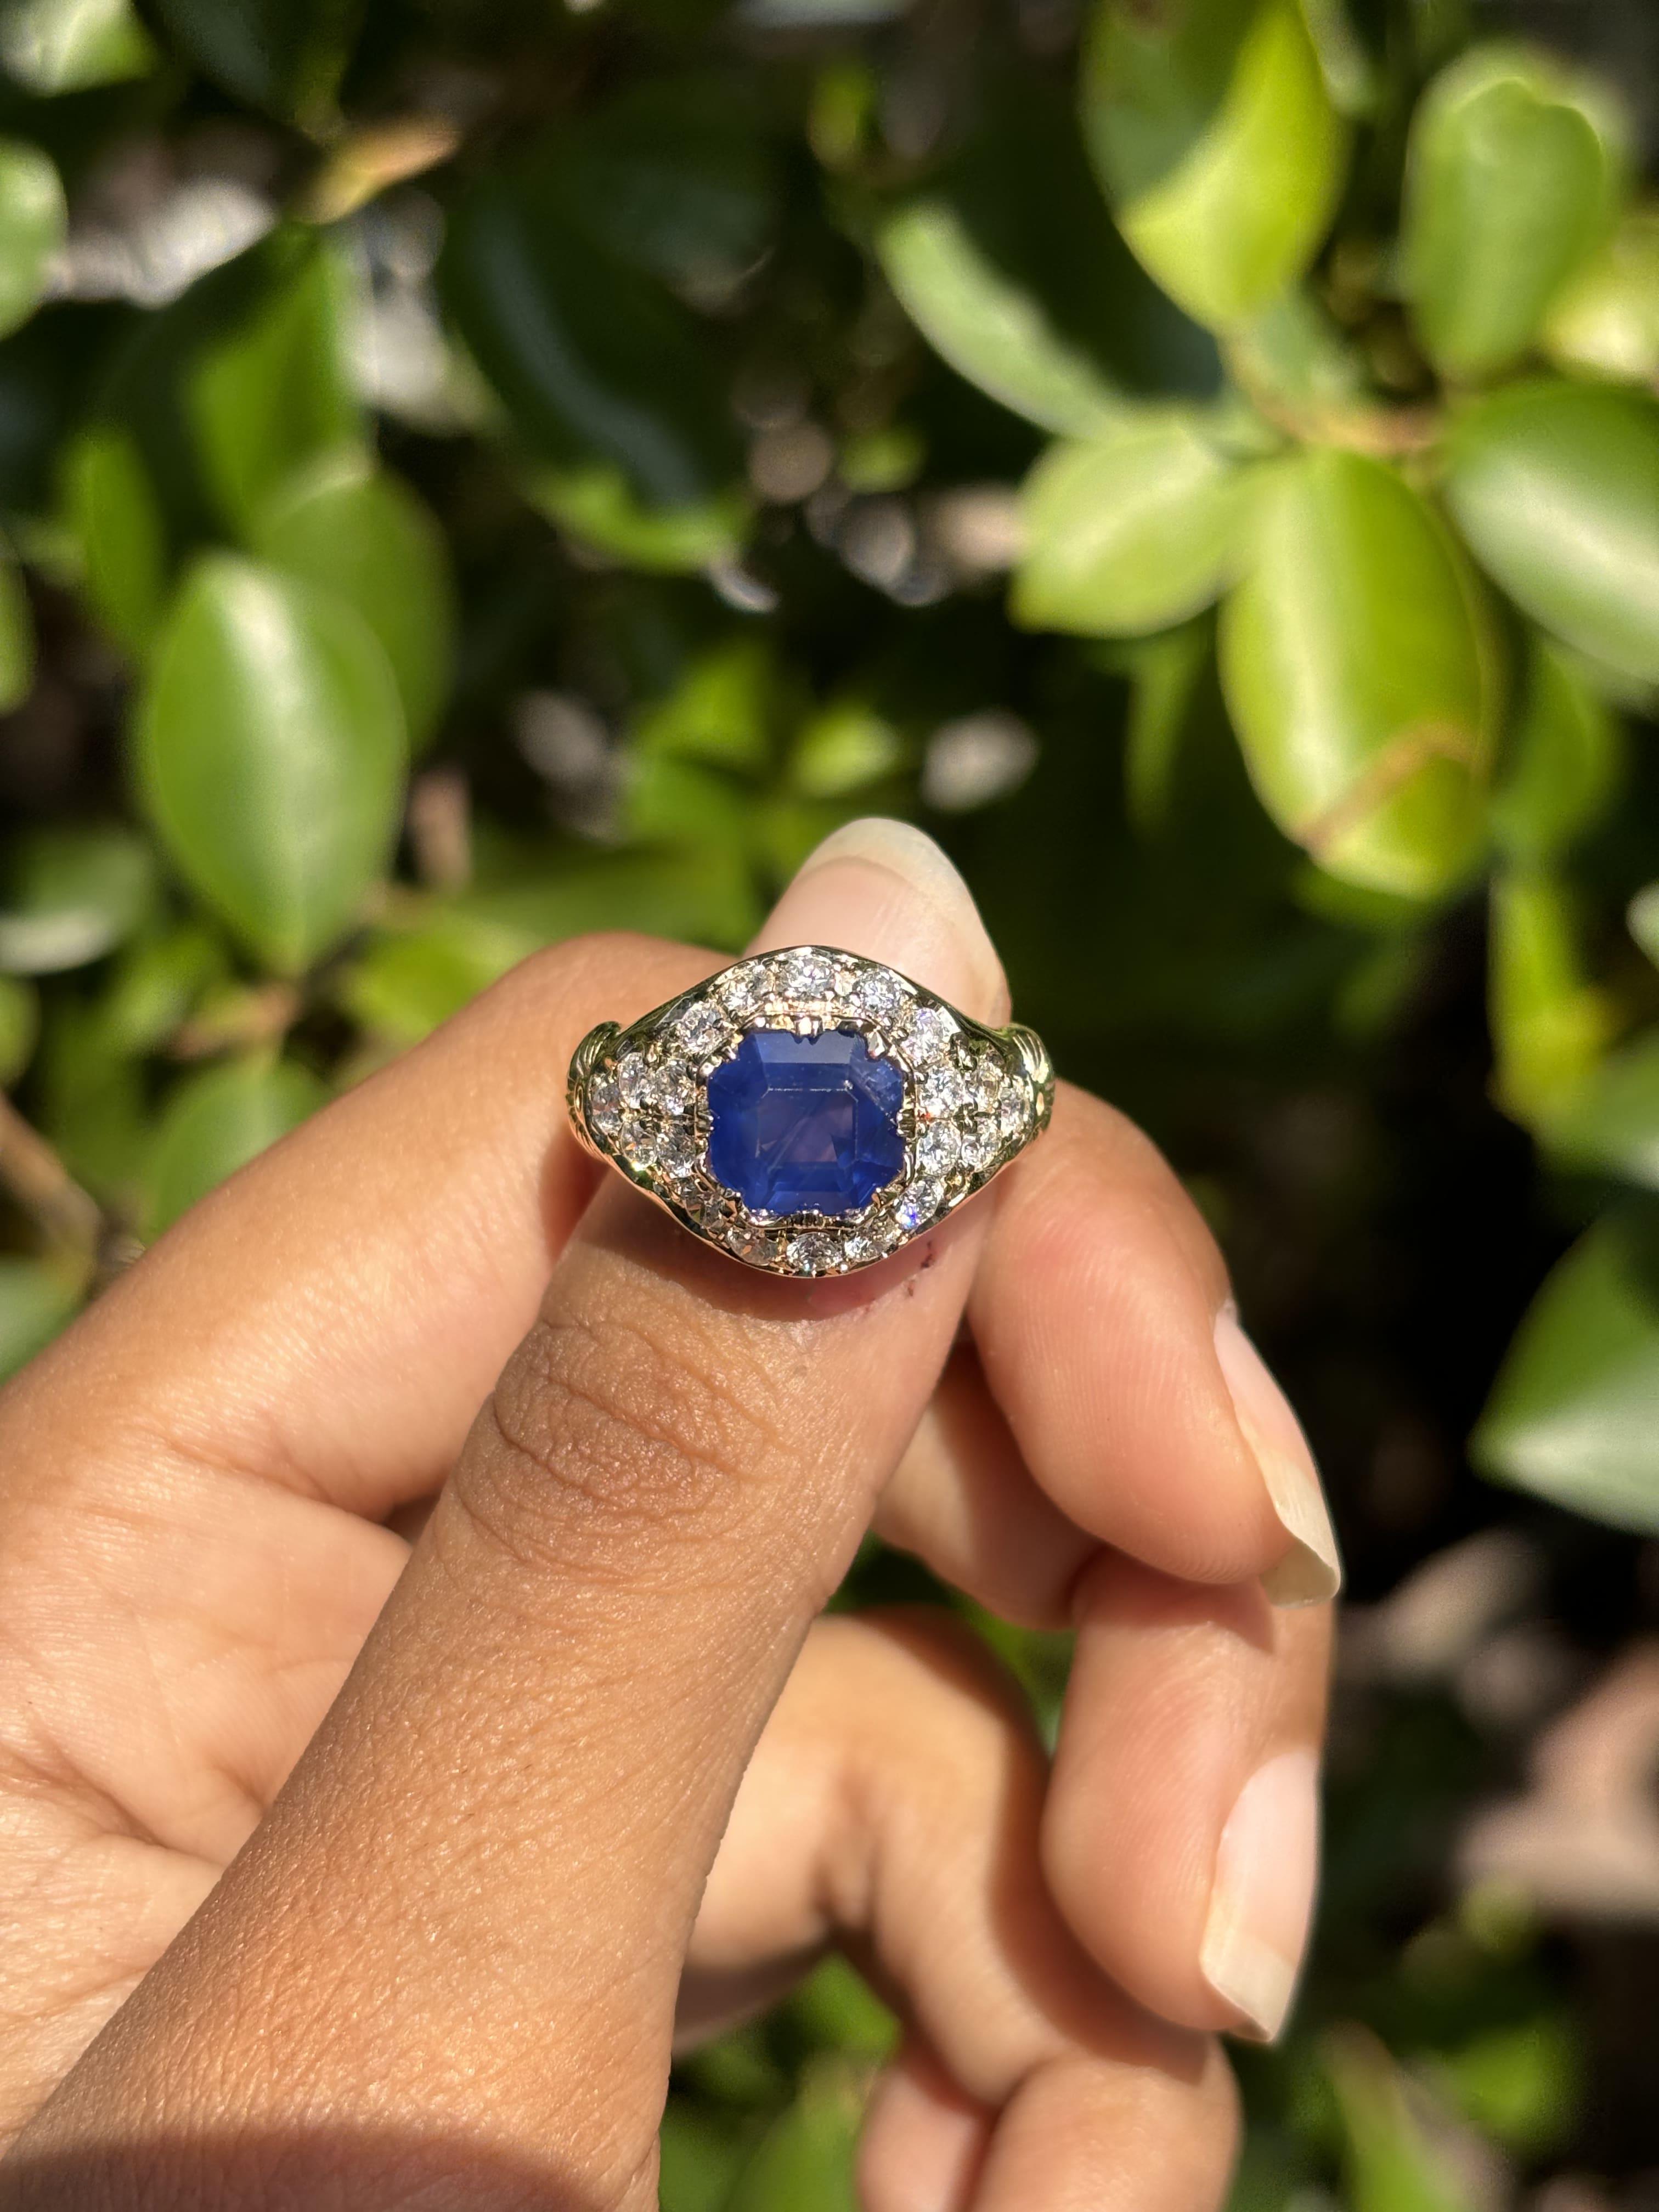 Women's or Men's   2.64 Carat Royal Blue Sapphire Ring with Old Mine Cut Diamonds in 18K Gold